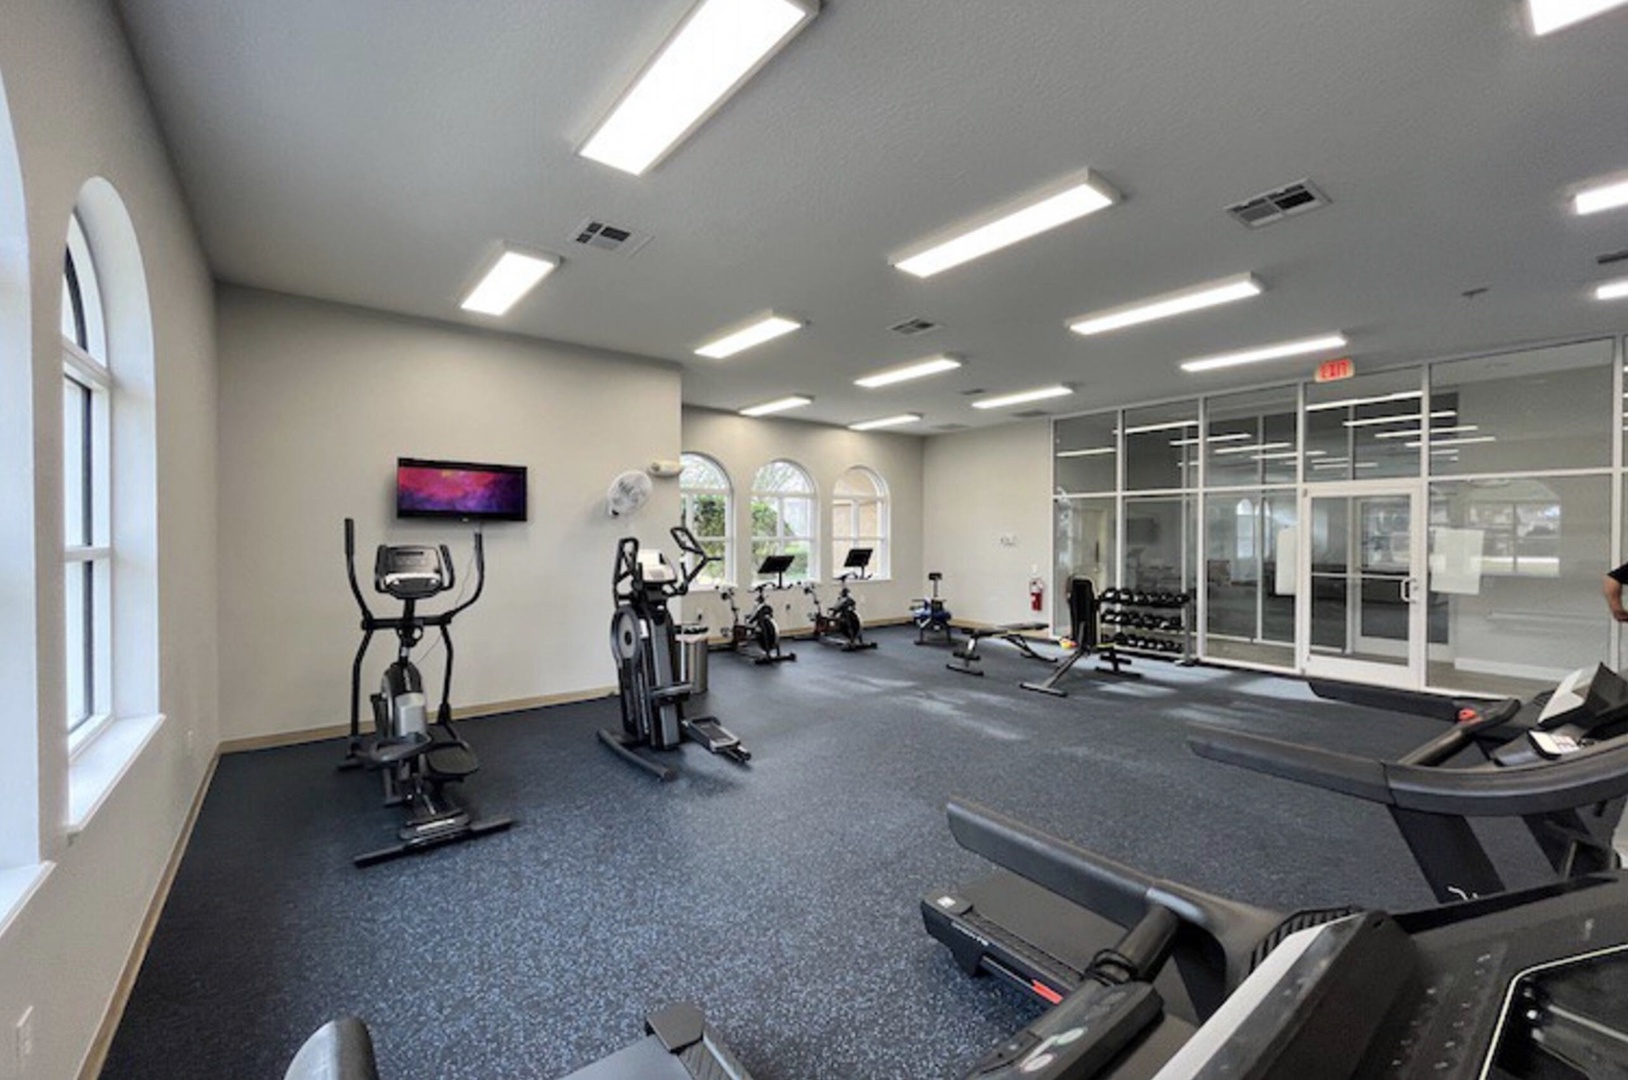 Enjoy the fabulous amenities available at the community clubhouse